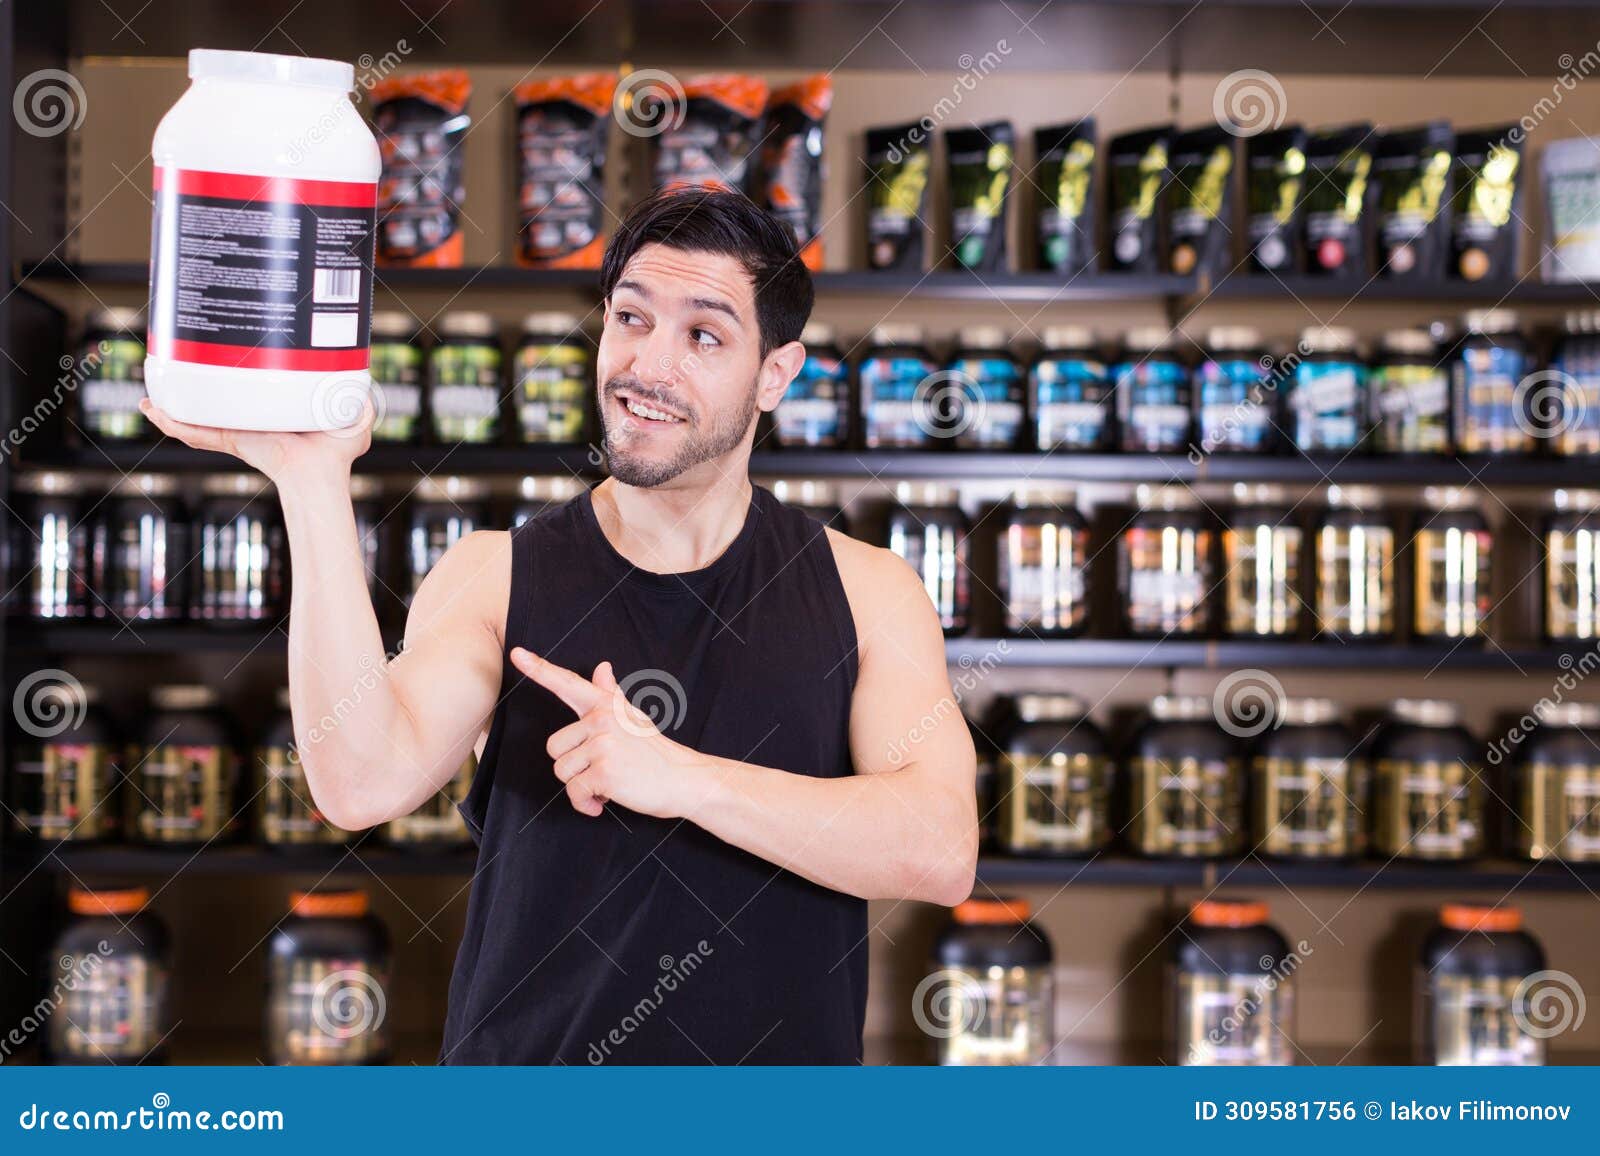 man demostration sport nutrition products